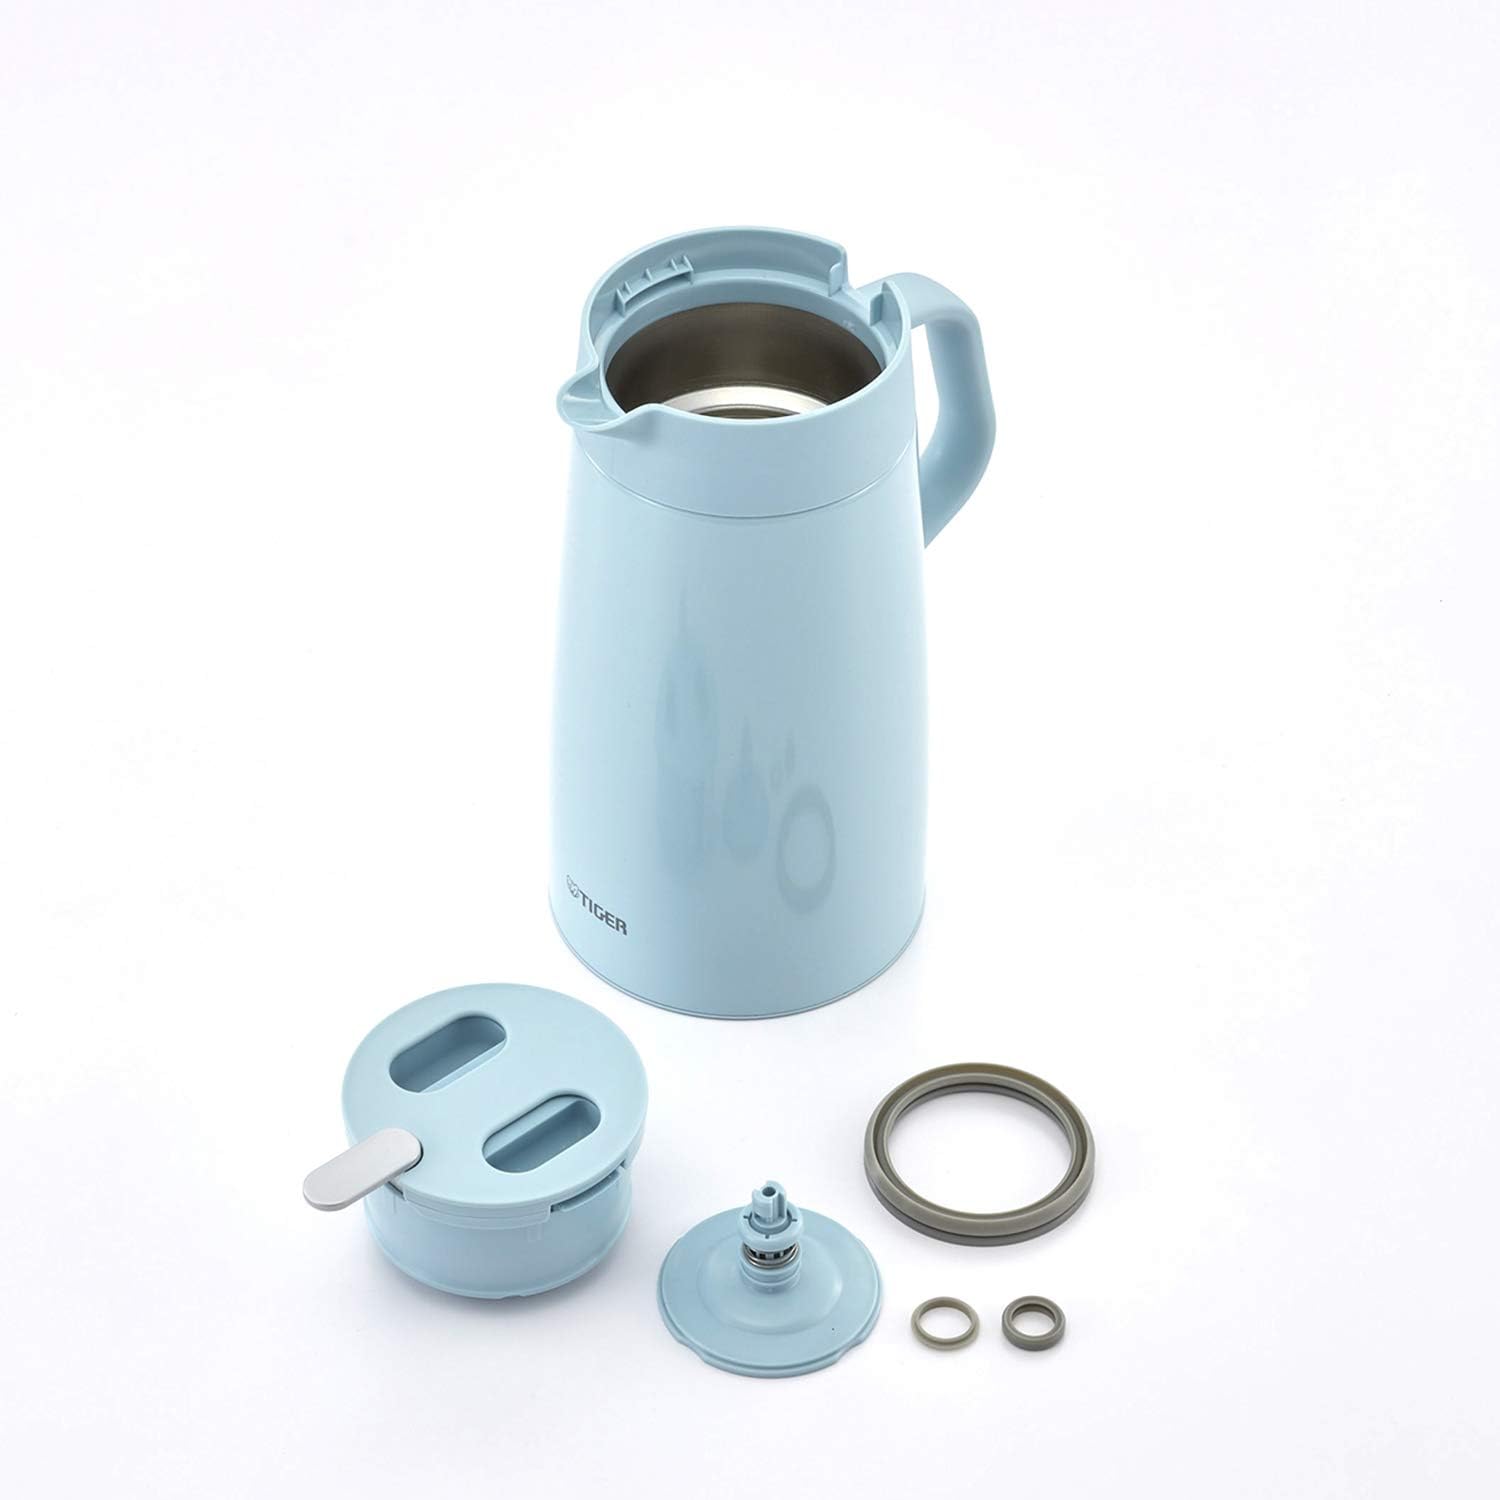 Insulated Tabletop Pot 1.6L PWO-A160 - imy Shop Japan